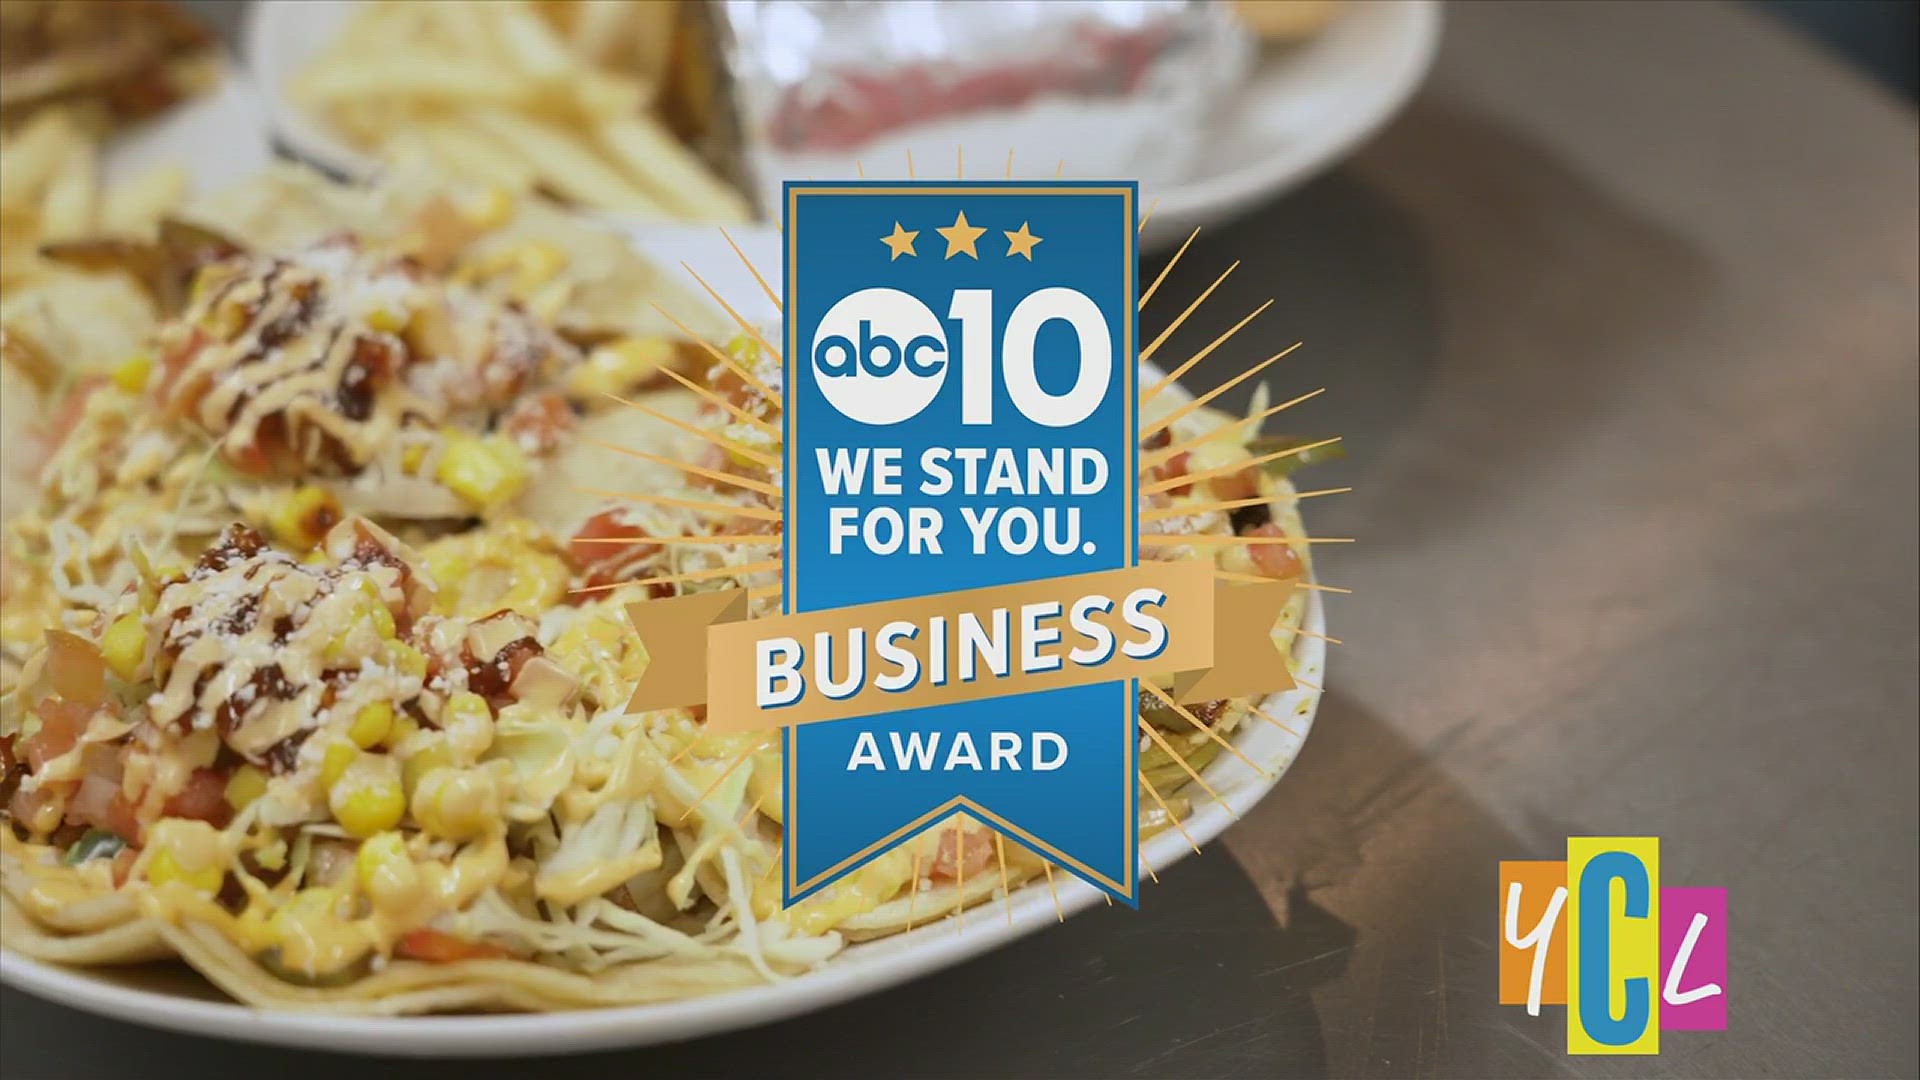 Gondo Fusion pairs Mexican and Cuban food traditions, serving the community in the good times and bad. Congratulations to ABC10's Business of the Month!